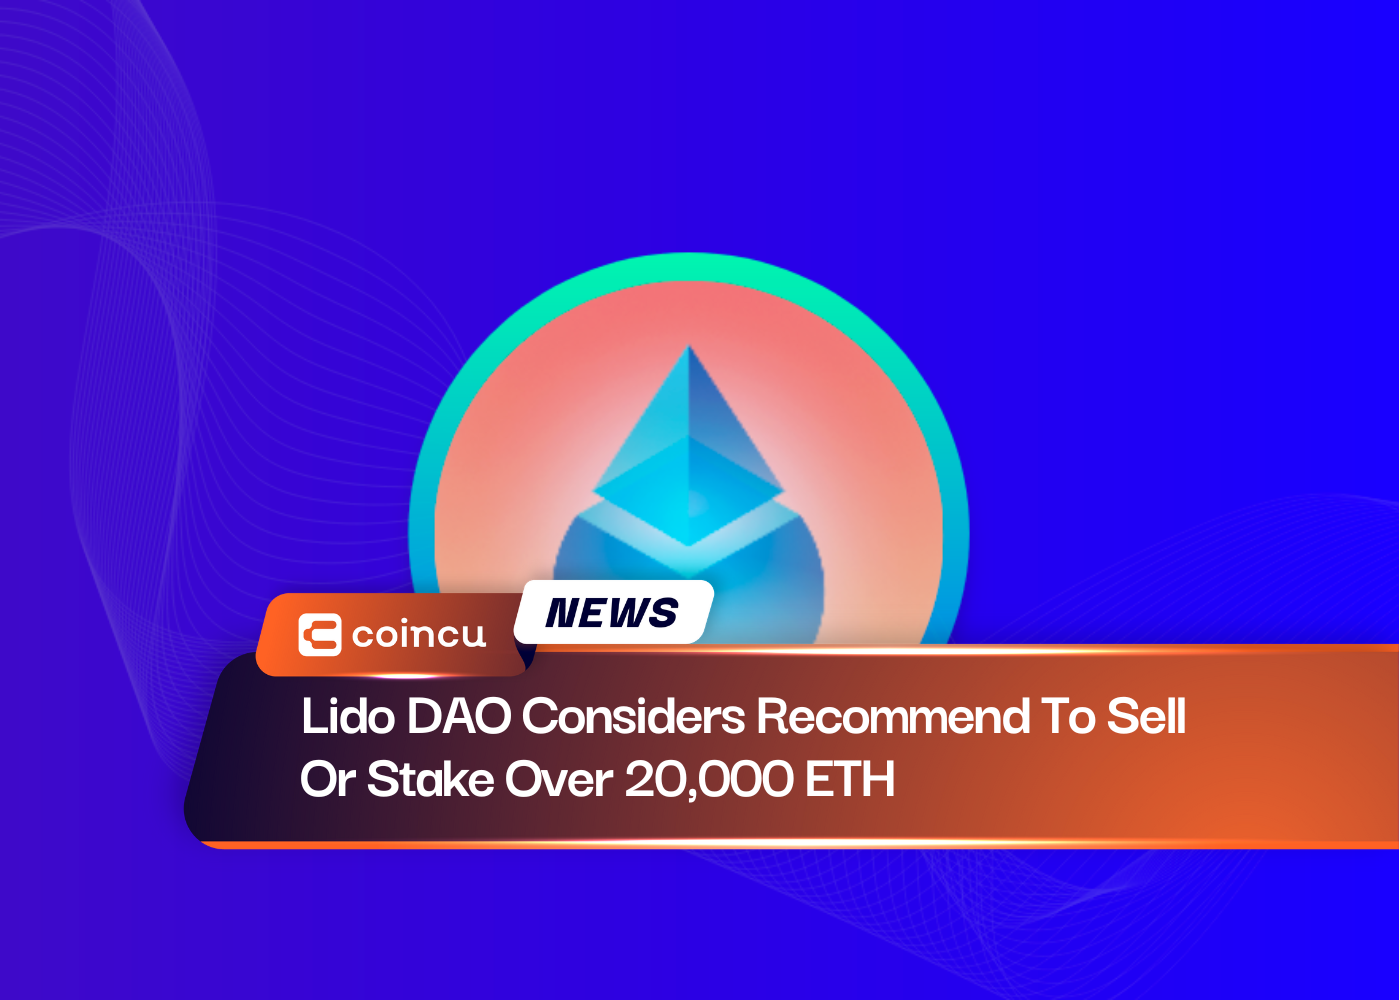 Lido DAO Considers Recommend To Sell Or Stake Over 20,000 ETH